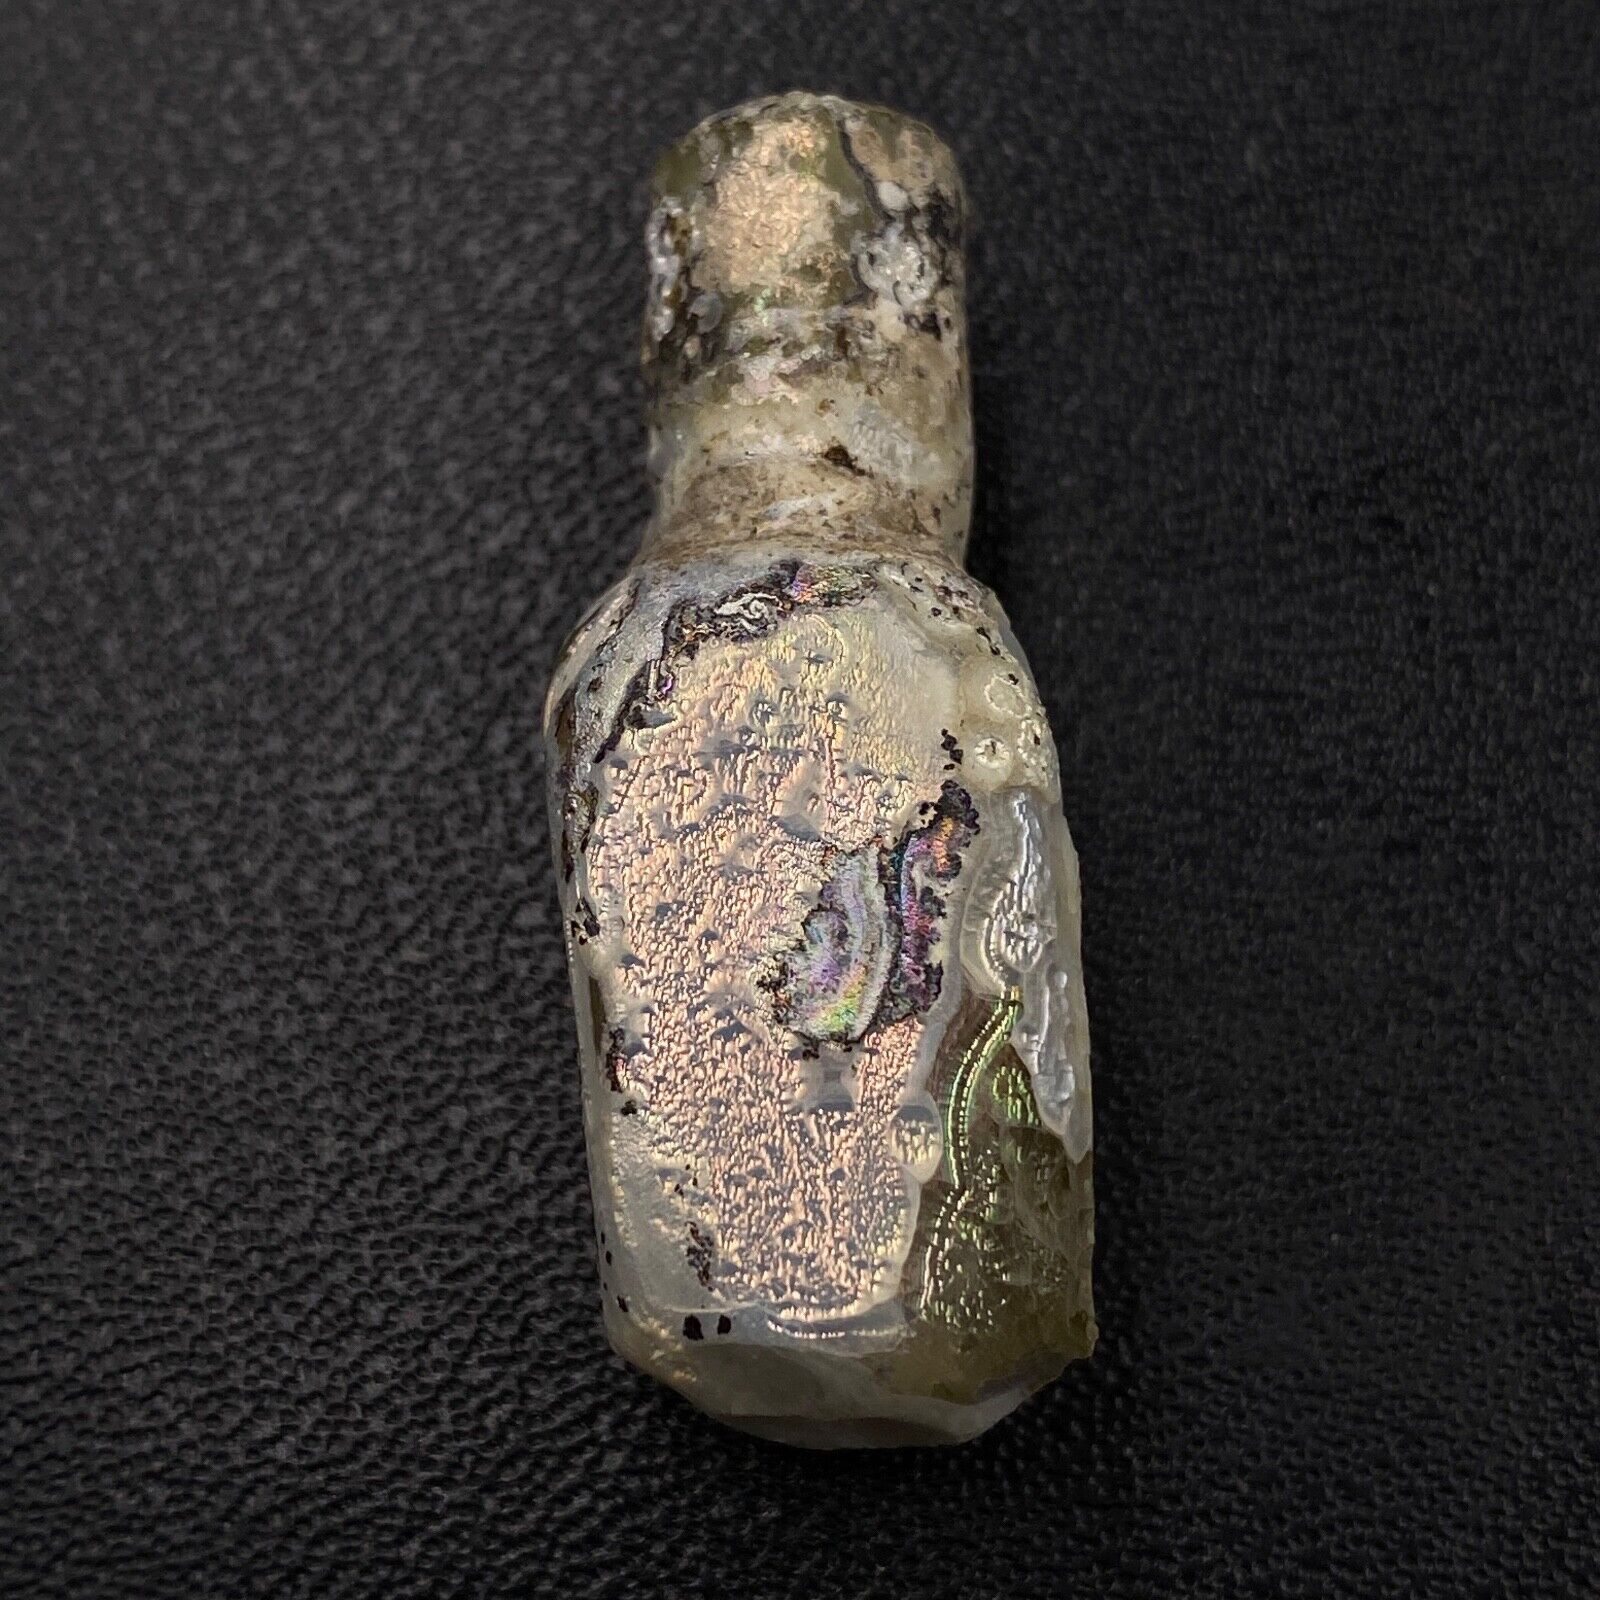 Beautiful Roman Glass Bottle  Container with Iridescent Patina 2nd Century AD